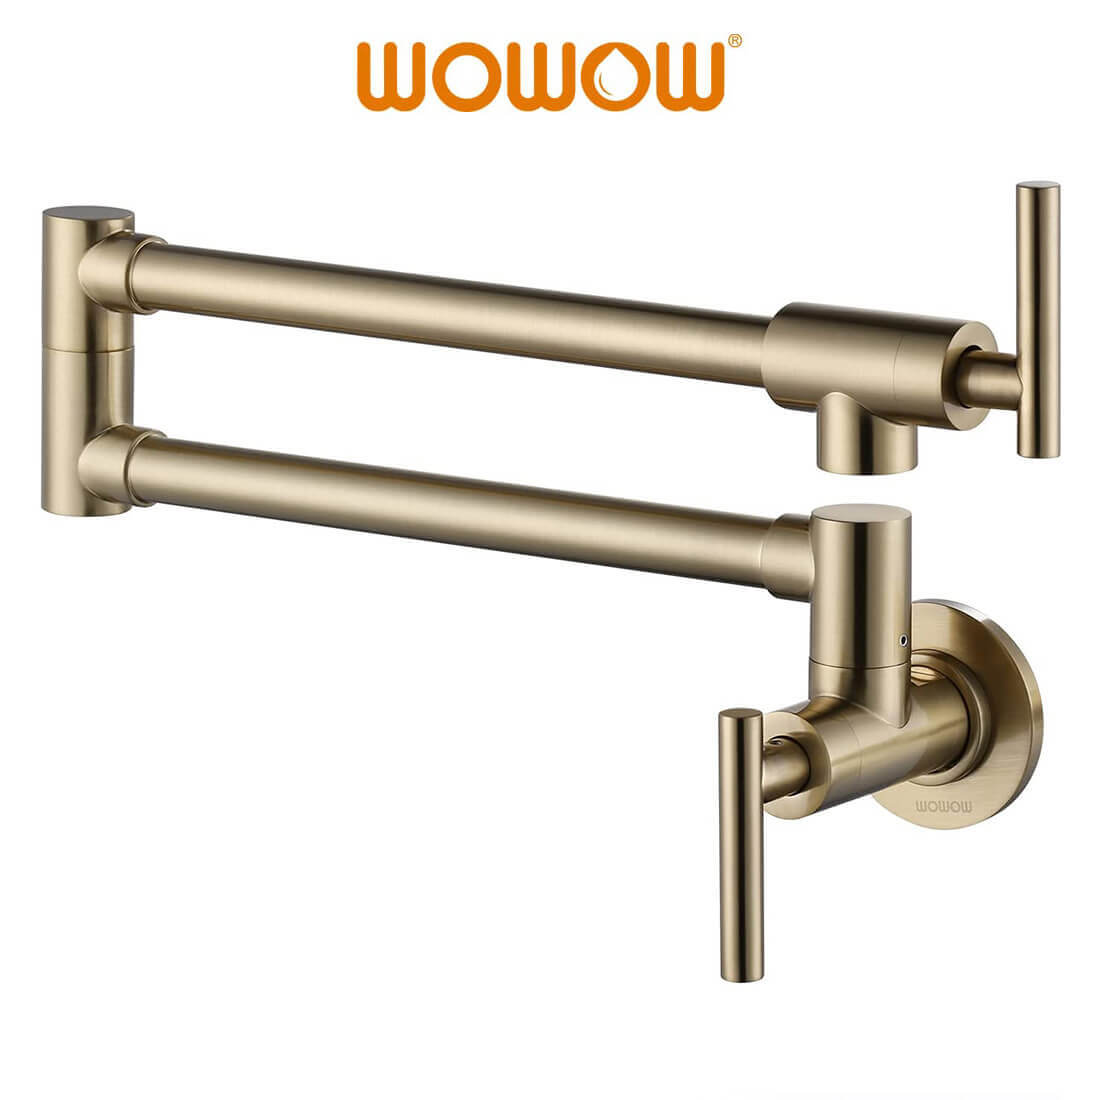 wow-faucet